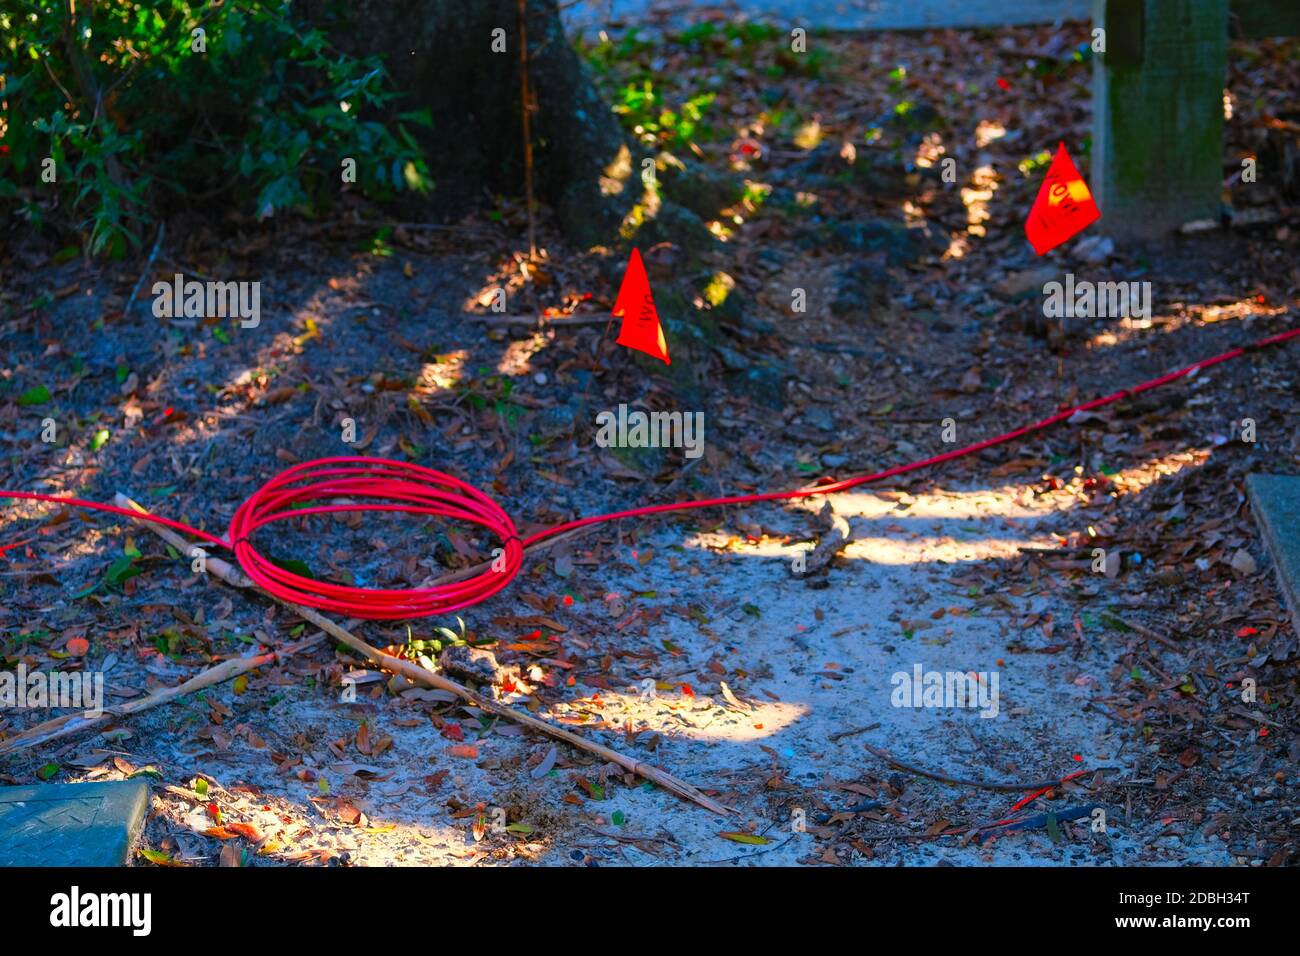 Urban Gardens, Cabbage, Kale, Sign, Chard, Sticks, Tomatoes, Peppers, Blue Fan, Red, Hose, Pot Stock Photo